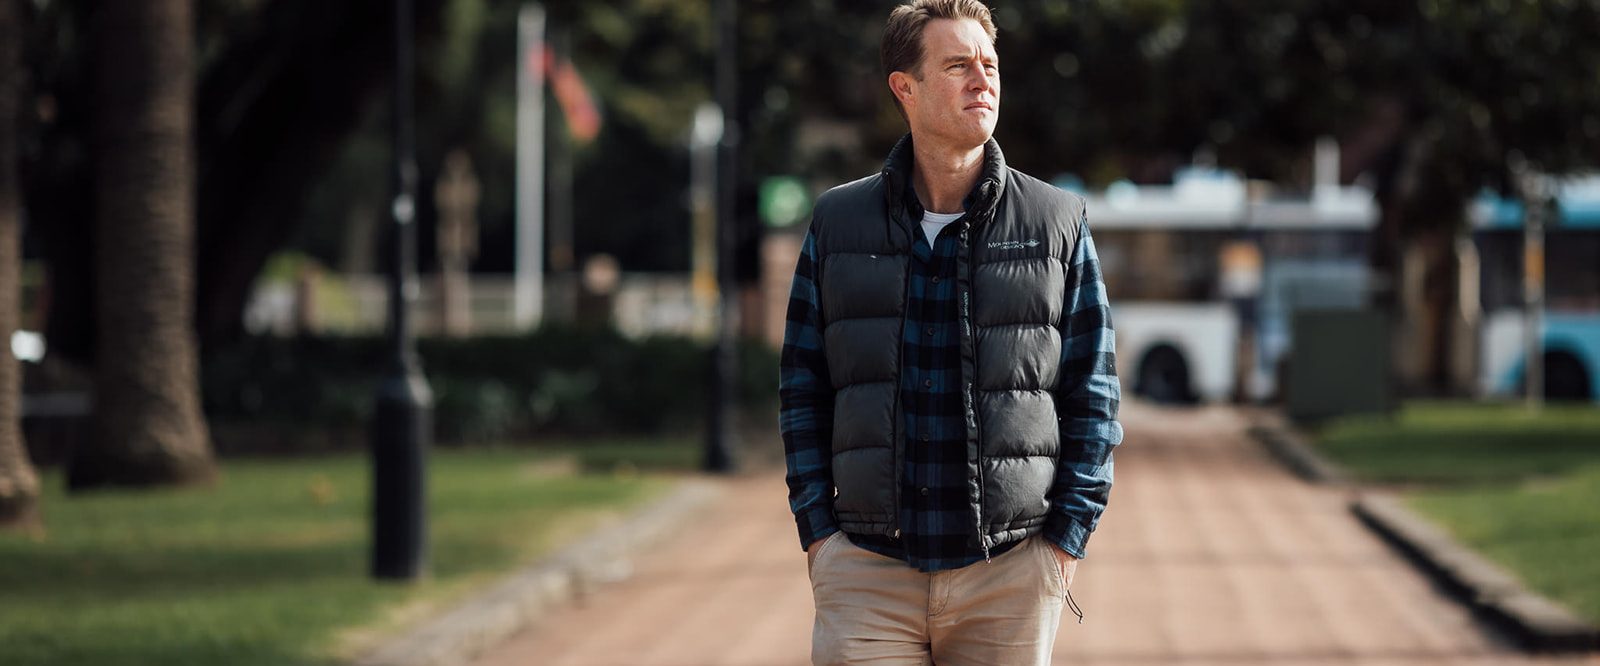 A troubled looking man wearing a checked shirt and black puffy vest walking in a park.